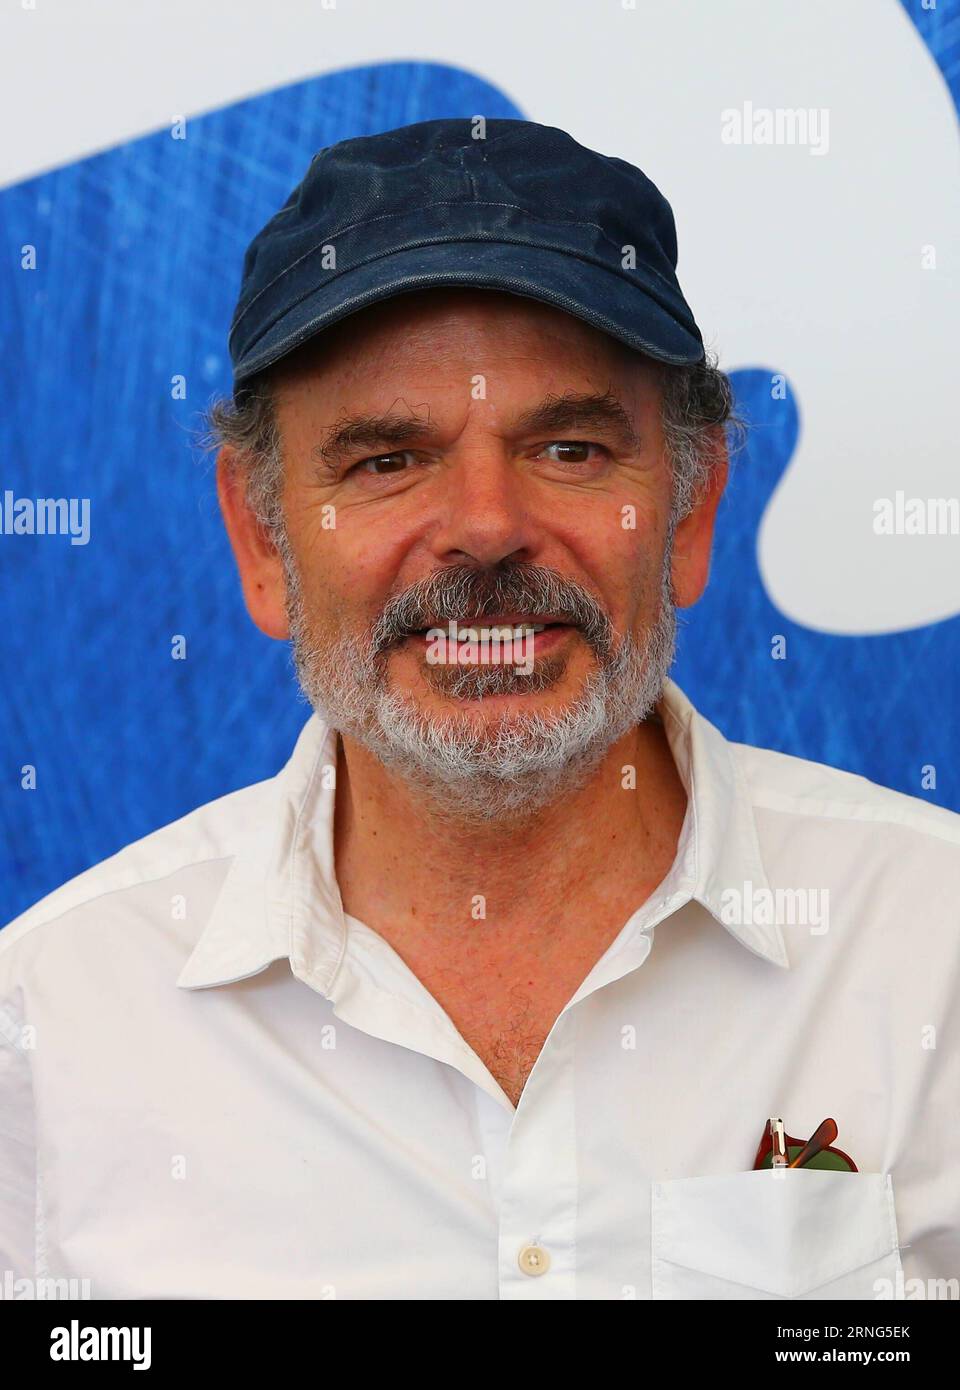 (160906) -- VENICE, Sept. 6, 2016 -- Actor Jean-Pierre Darroussin attends a photocall for the film Une Vie in competition at the 73rd Venice Film Festival in Venice, Italy, on Sept. 6, 2016. ) (lr) ITALY-VENICE-FILM FESTIVAL-UNE VIE-PHOTOCALL GongxBing PUBLICATIONxNOTxINxCHN   160906 Venice Sept 6 2016 Actor Jean Pierre Darroussin Attends a photo call for The Film Une VIE in Competition AT The 73rd Venice Film Festival in Venice Italy ON Sept 6 2016 LR Italy Venice Film Festival Une VIE photo call GongxBing PUBLICATIONxNOTxINxCHN Stock Photo